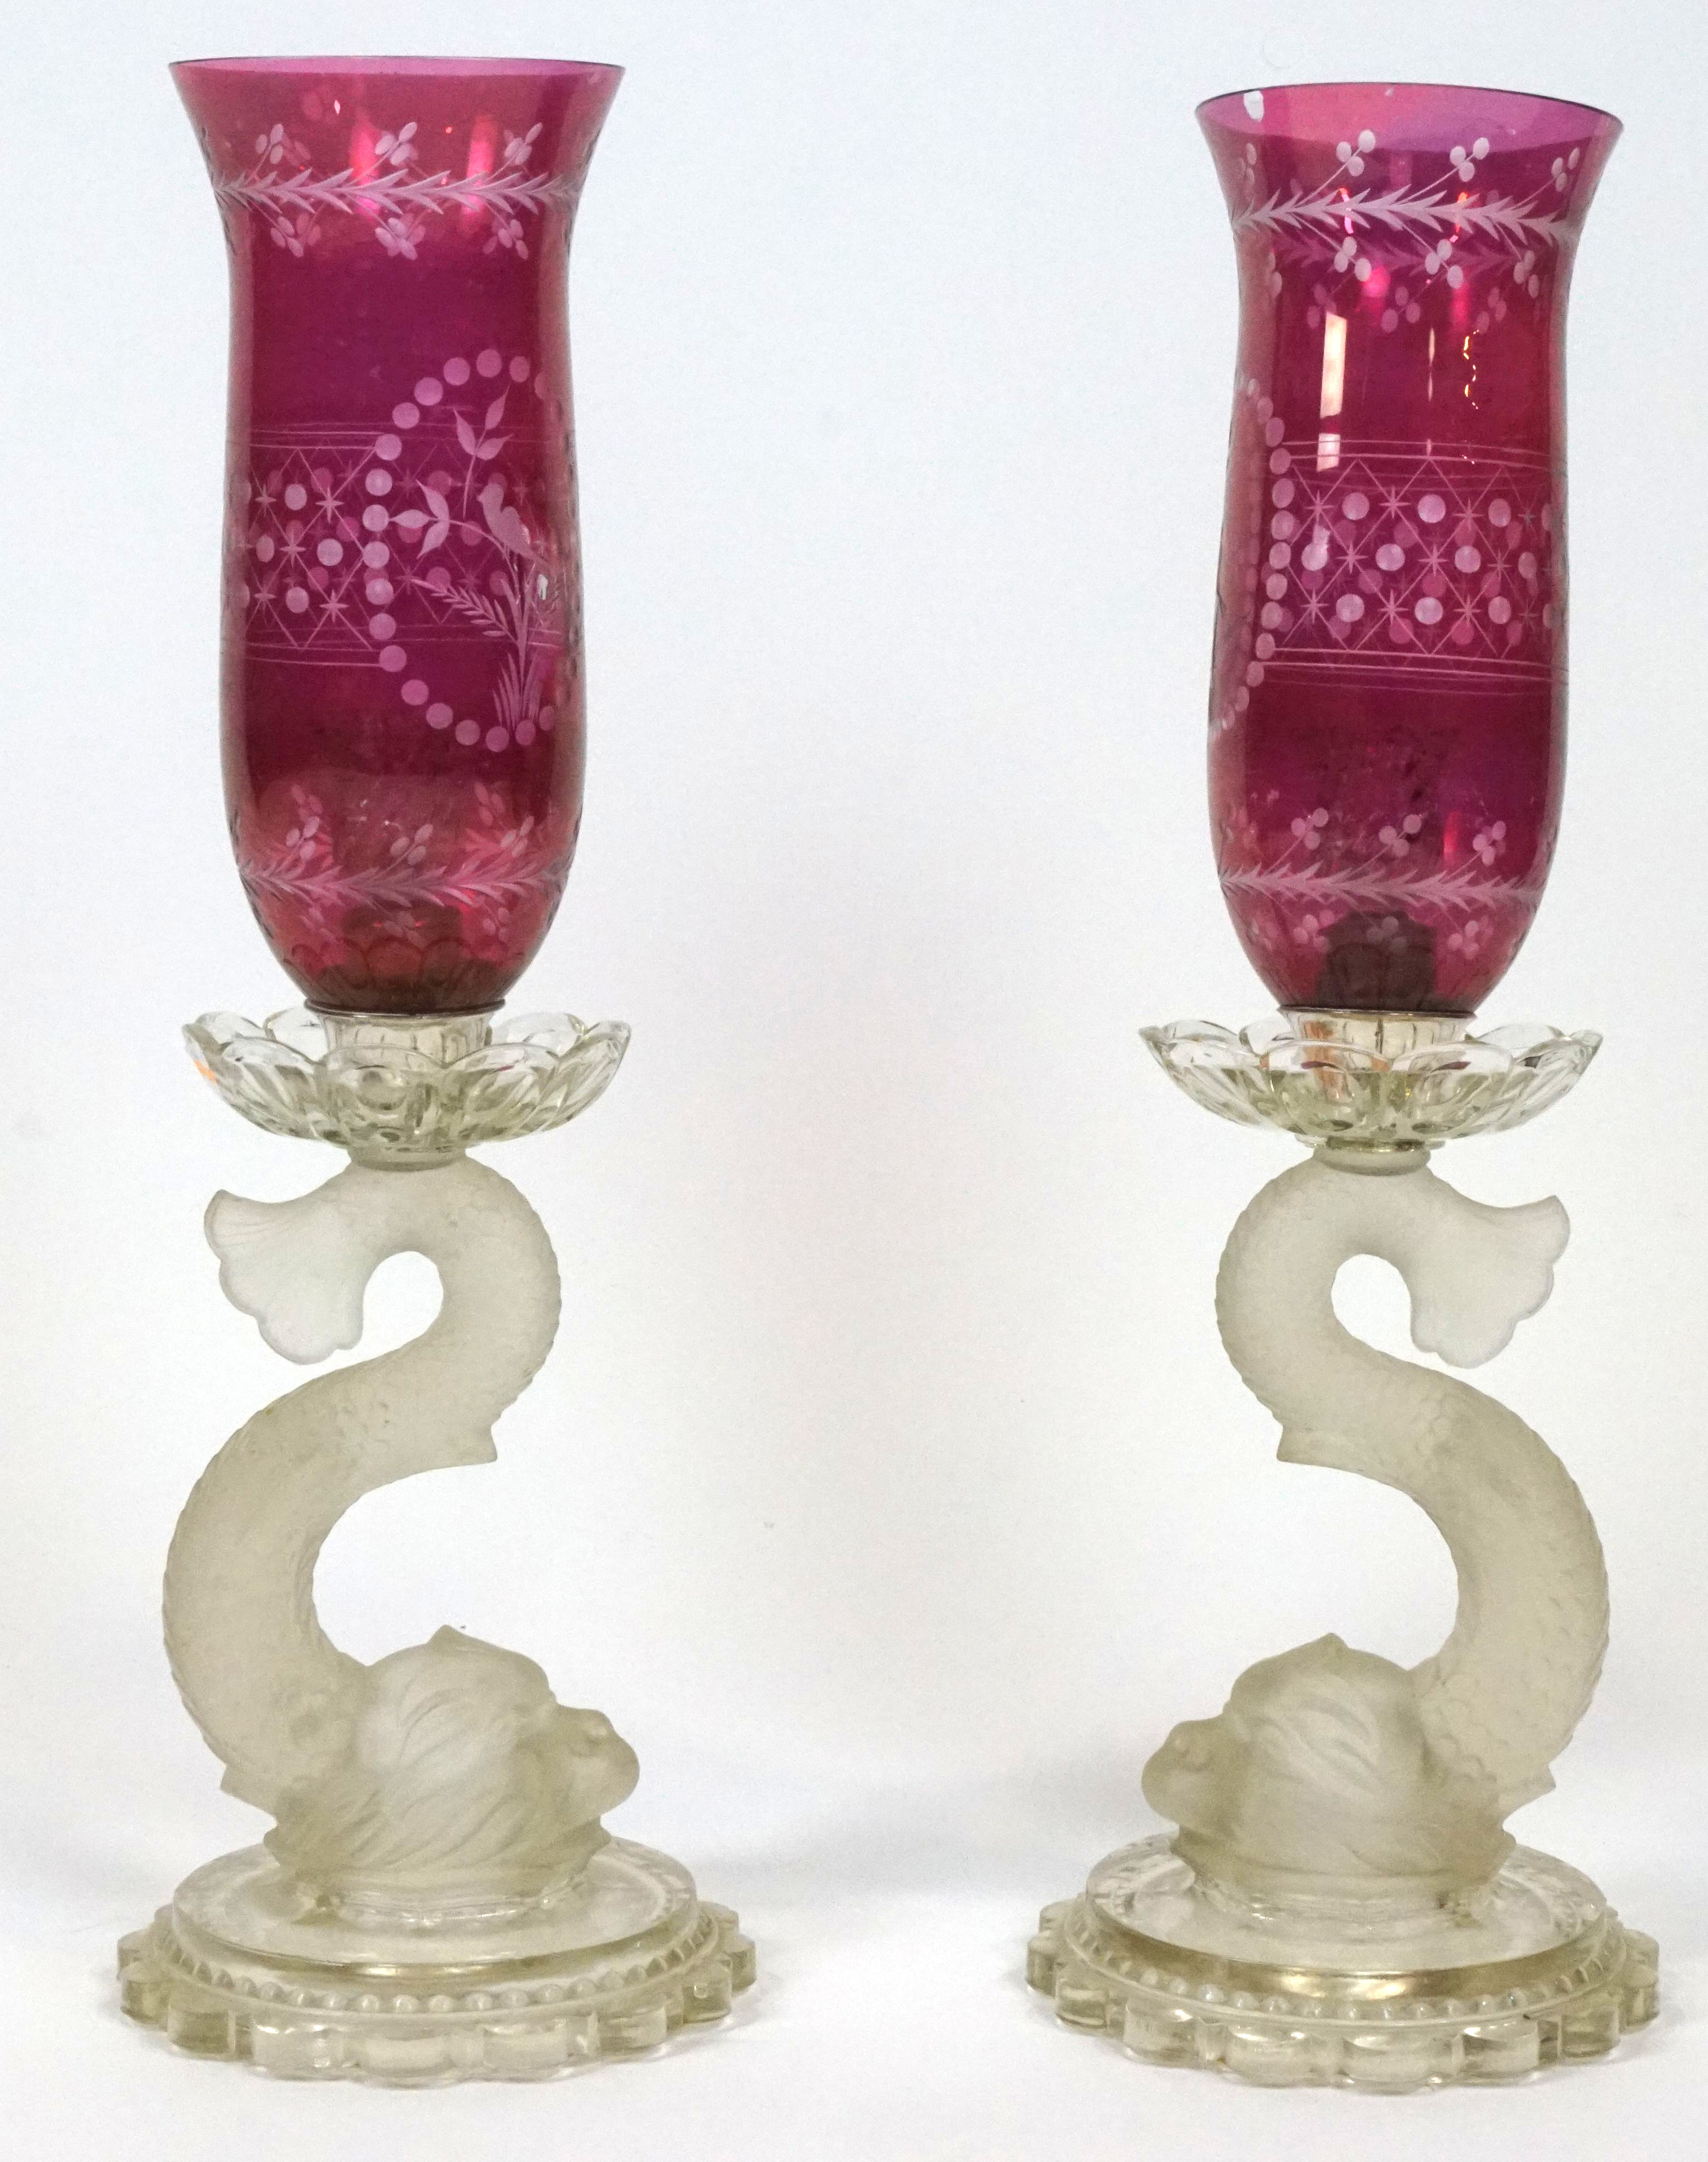 A pair of Baccarat dolphin candlesticks, each with engraved ruby-tinted engraved flared shades,